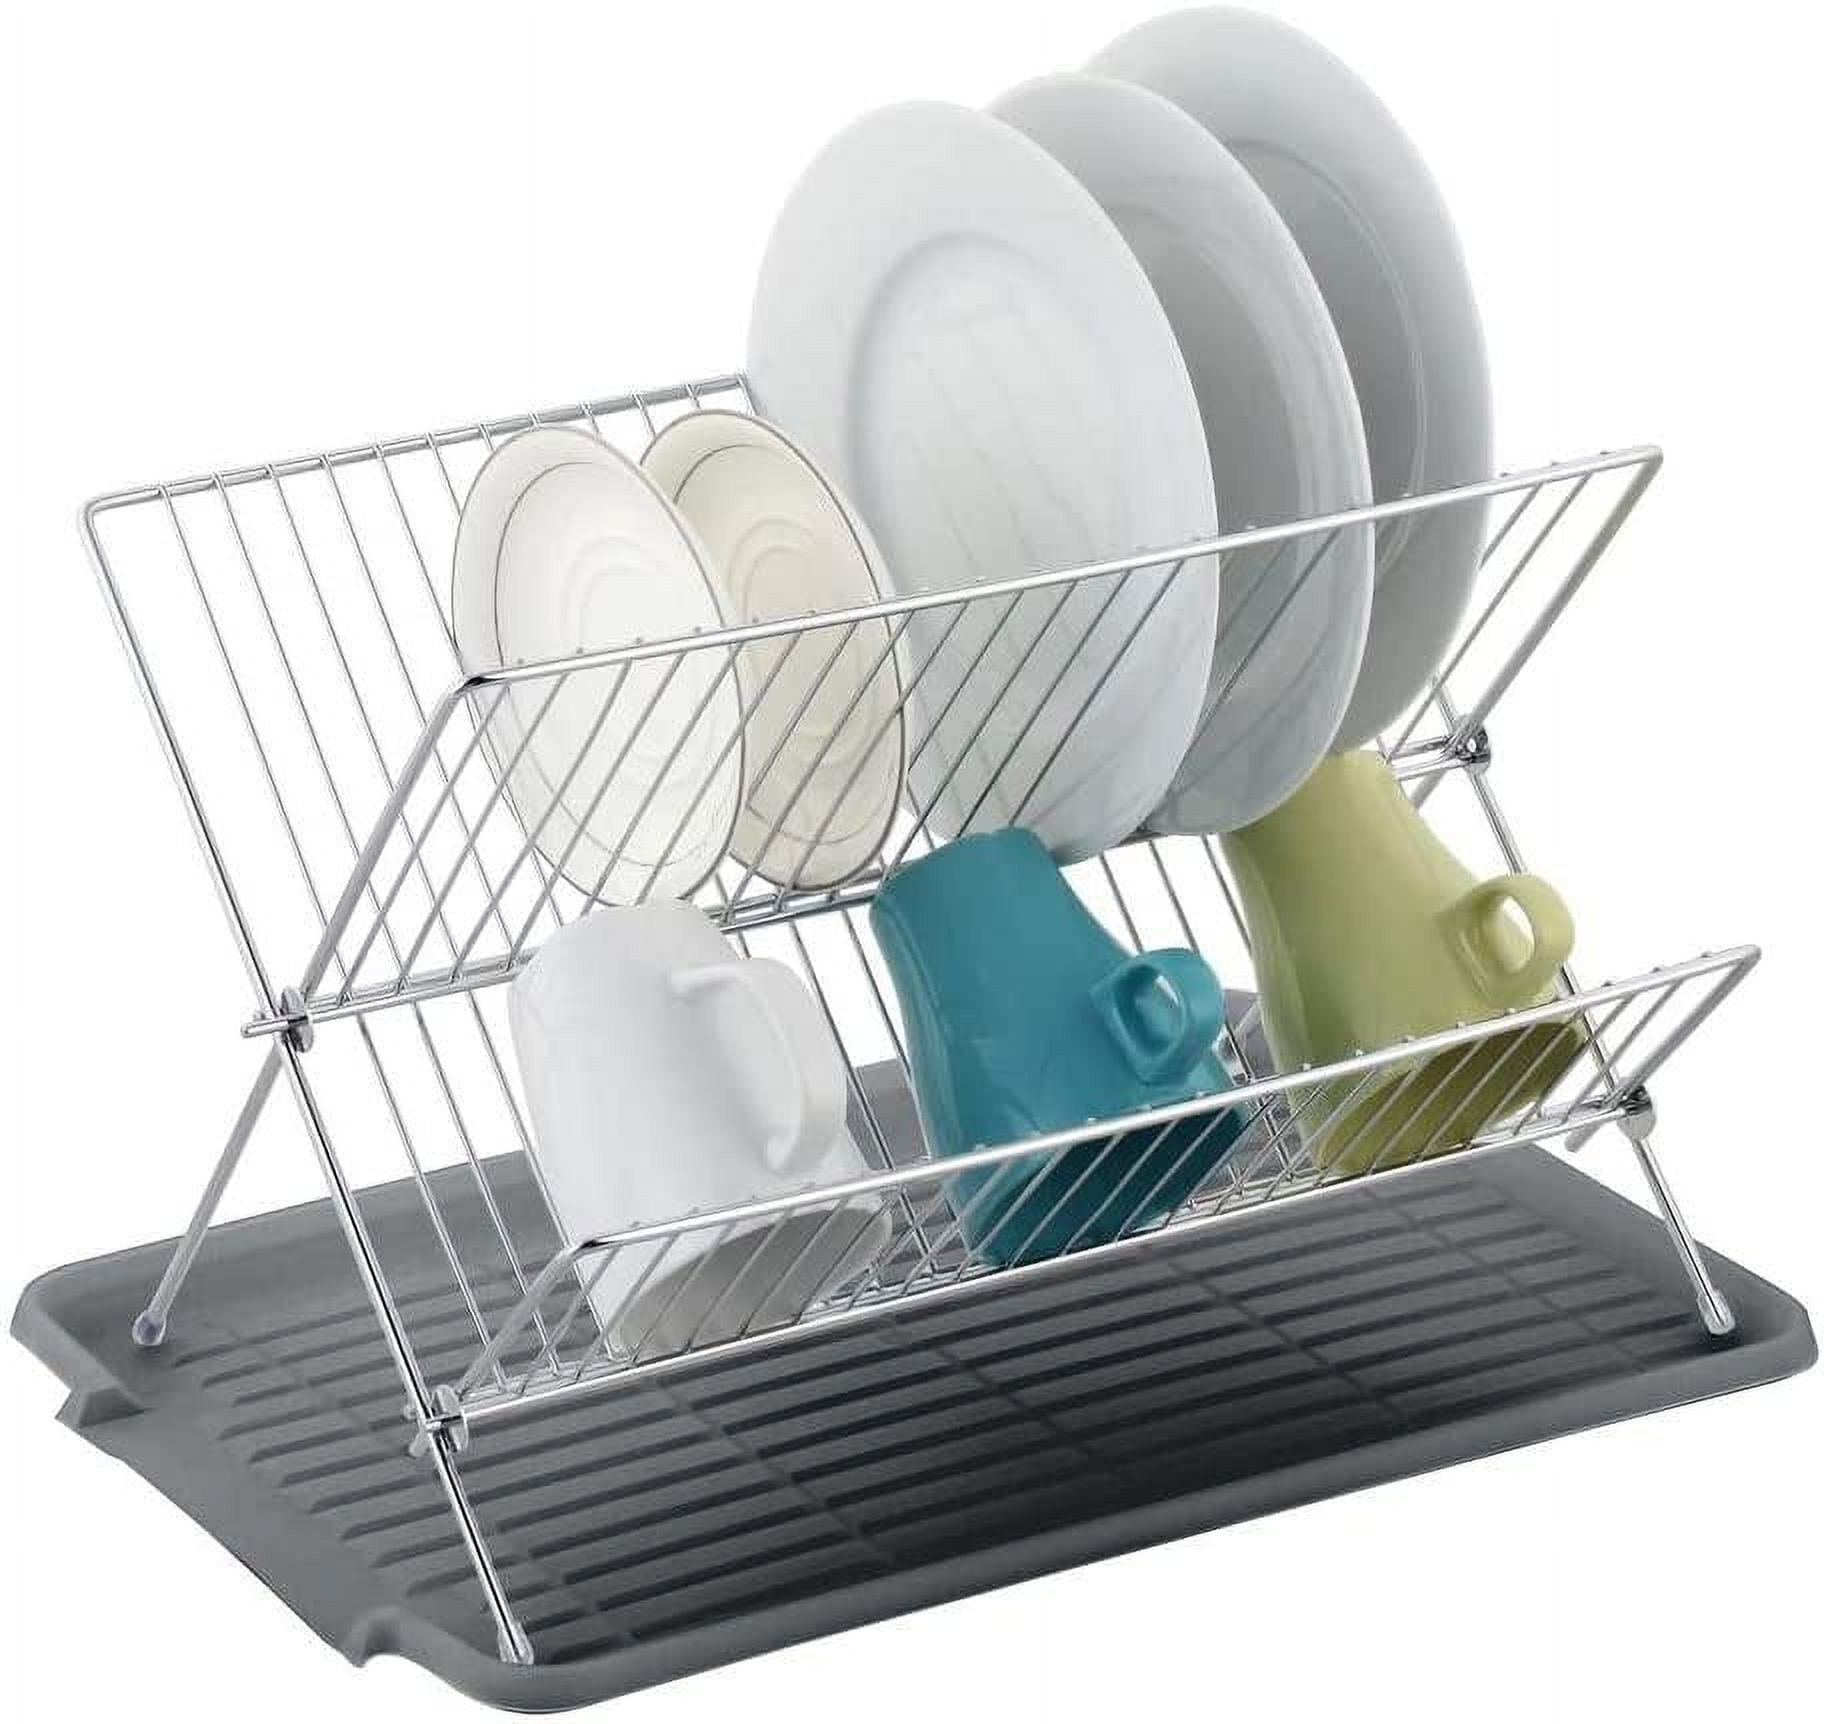 PXRACK Dish Drying Rack,Stainless Steel Dish Racks for Kitchen Counter Two  Tier Collapsible Dish Racks for Storage Dishes Foldable Dish Drainer with  Utensil Hol…